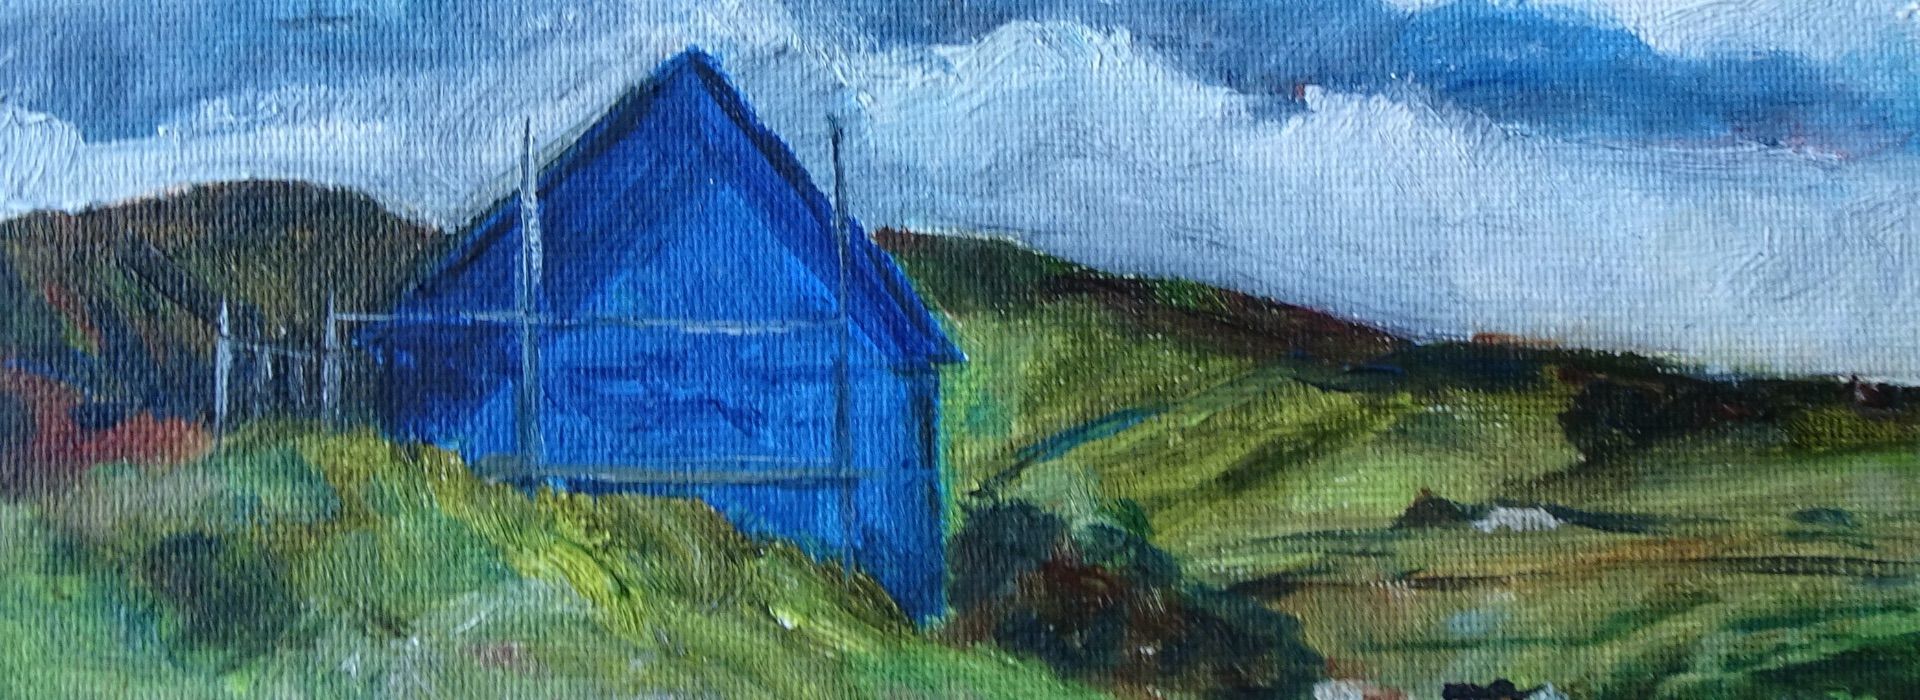 1 The Blue House On The Hill, Old Finstown Road, Orkney 8x8inch 20x20cm Oil